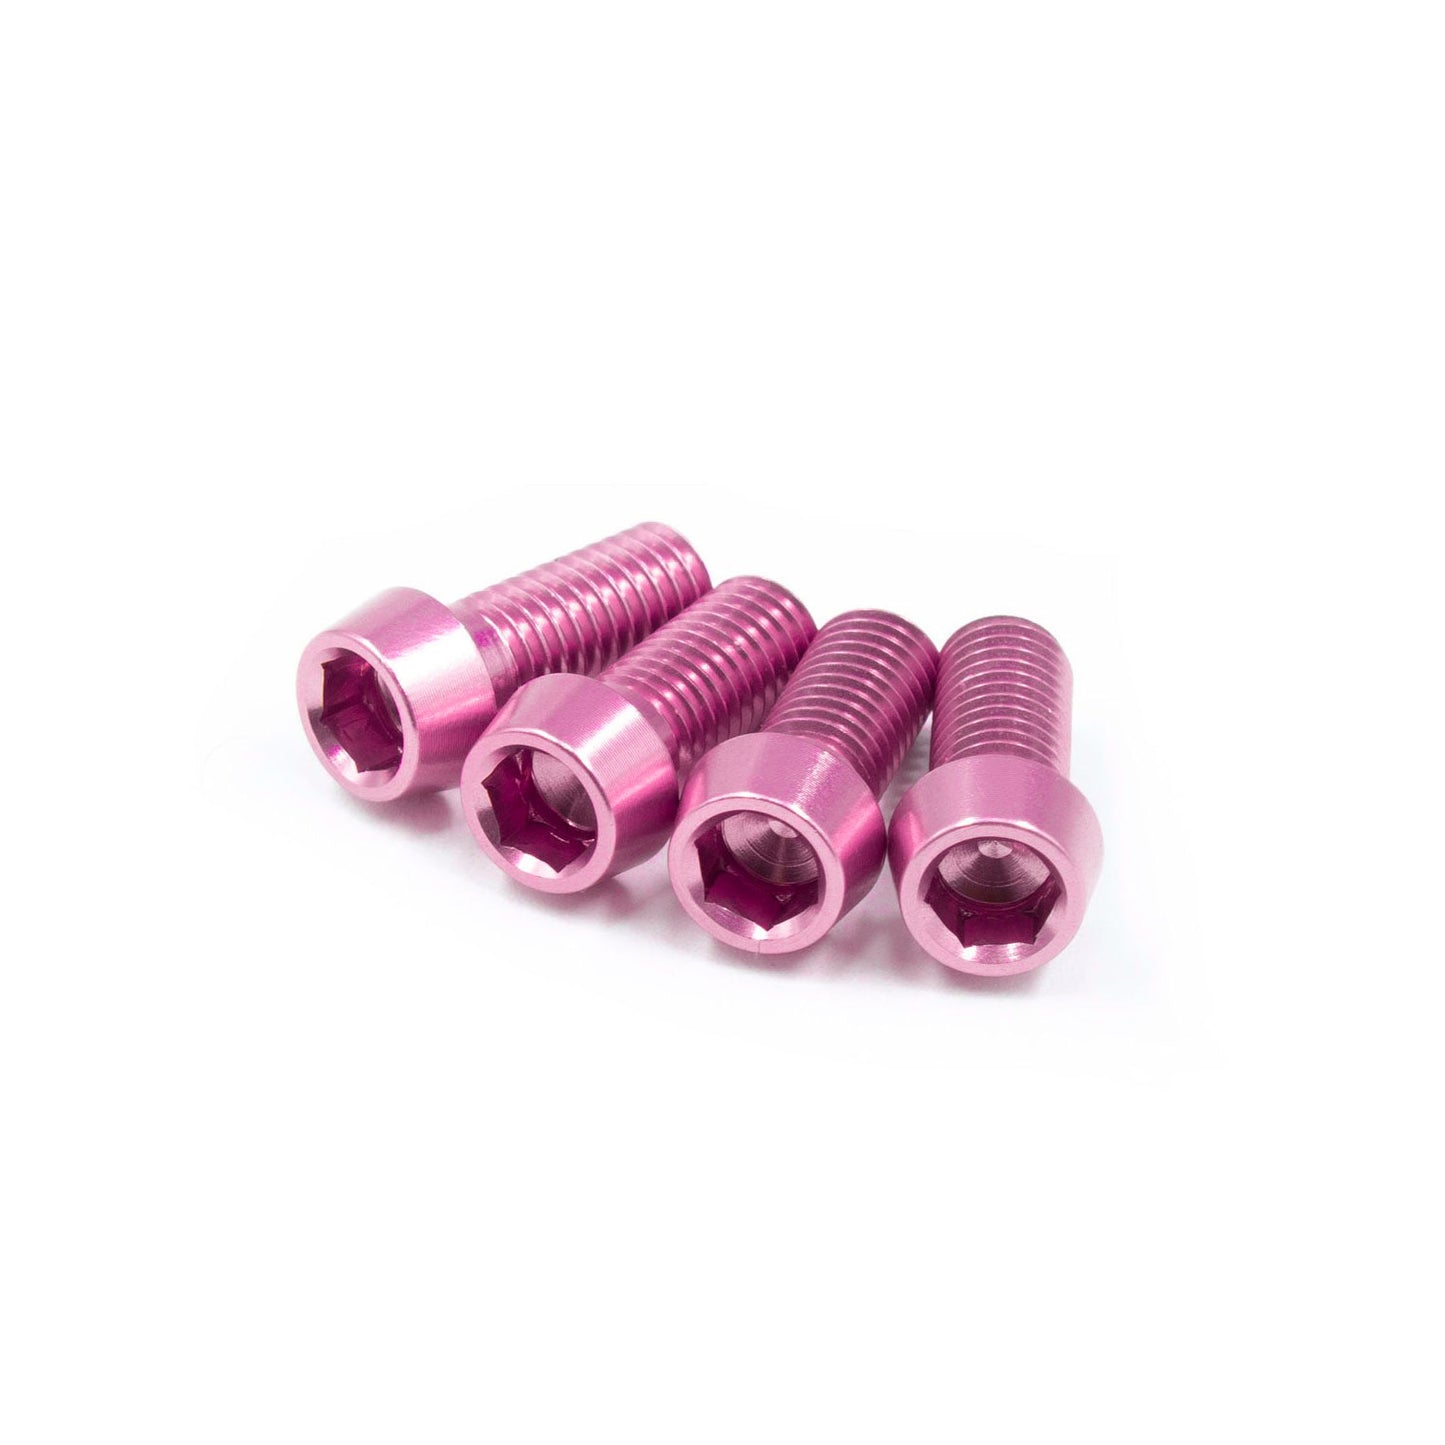 Pink, ultra lightweight set of bolts for bicycle bottle cages